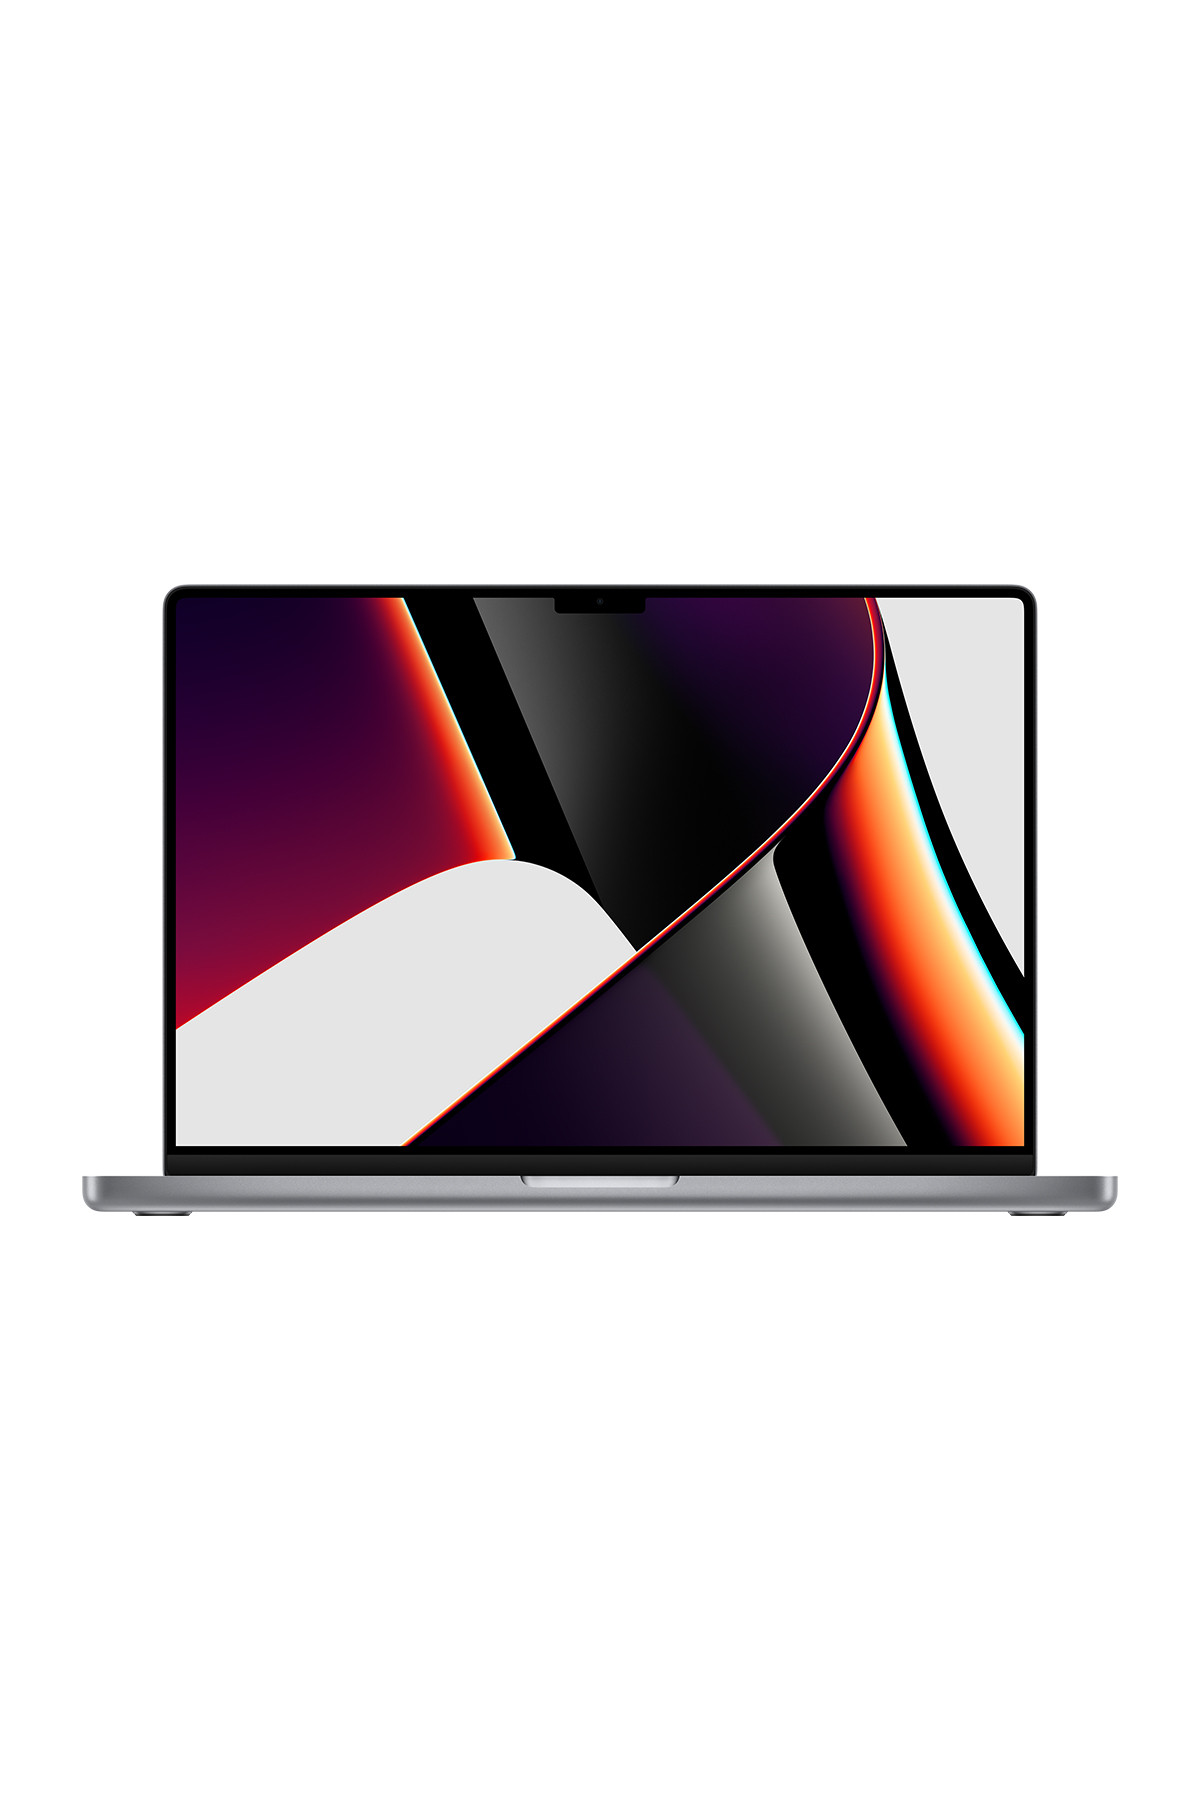 MacBook Pro 16" - Space Grey/Apple M1 Pro Chip with 10‑CORE CPU and 16‑CORE GPU/16GB/512GB SSD